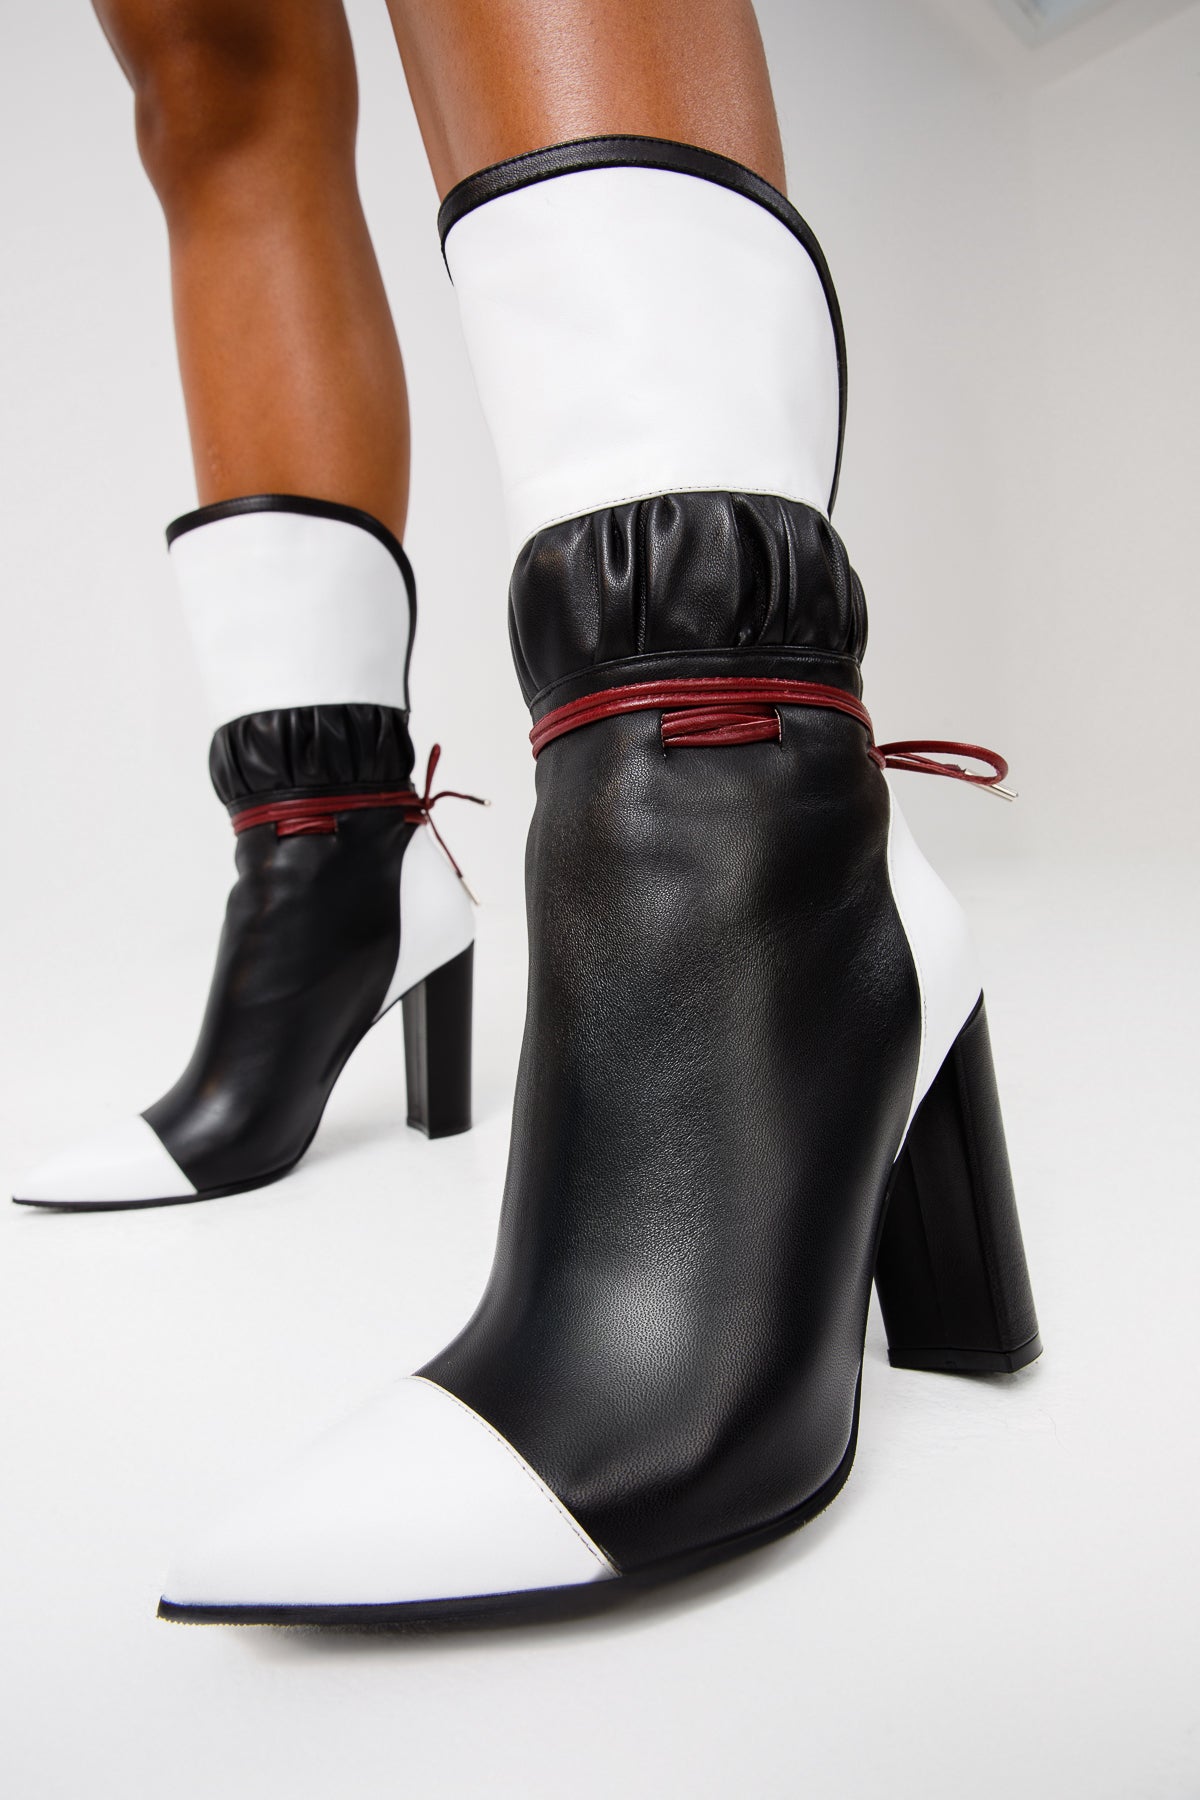 The Lucca Black & White Leather Mid Calf High Heel Women Boot Limited –  Vinci Leather Shoes